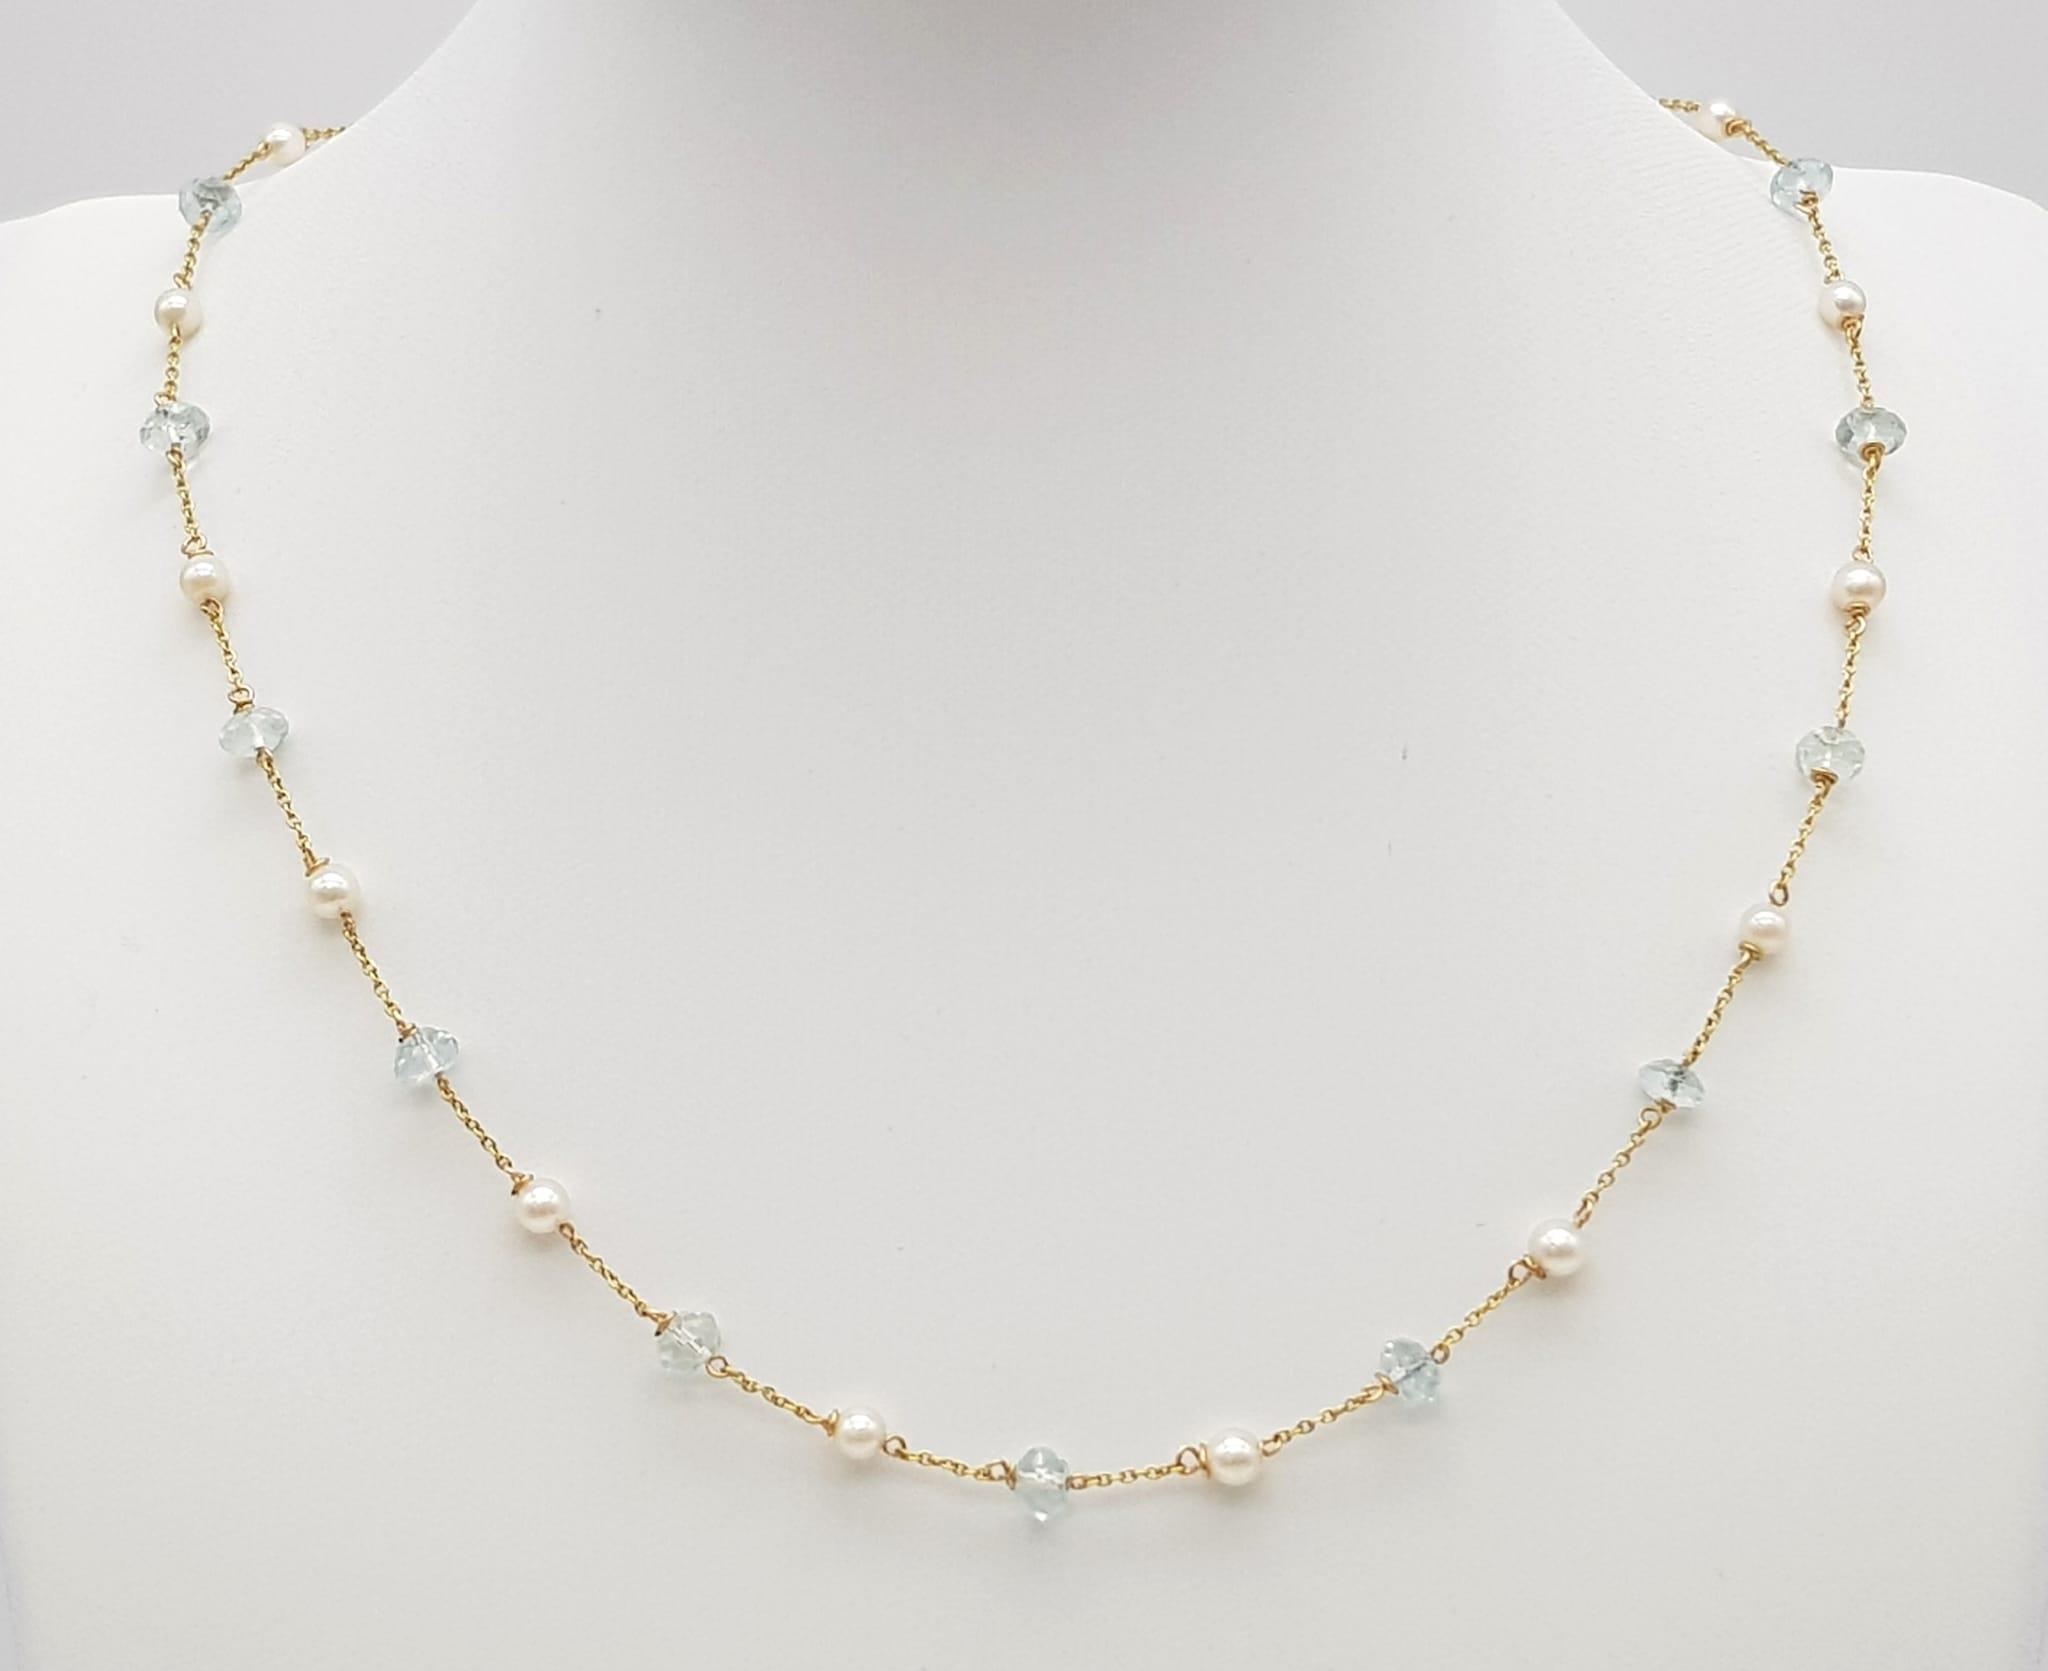 A Vintage Seed Pearl and White Quartz 14K Yellow Gold Necklace. 4.5g total weight. 44cm.